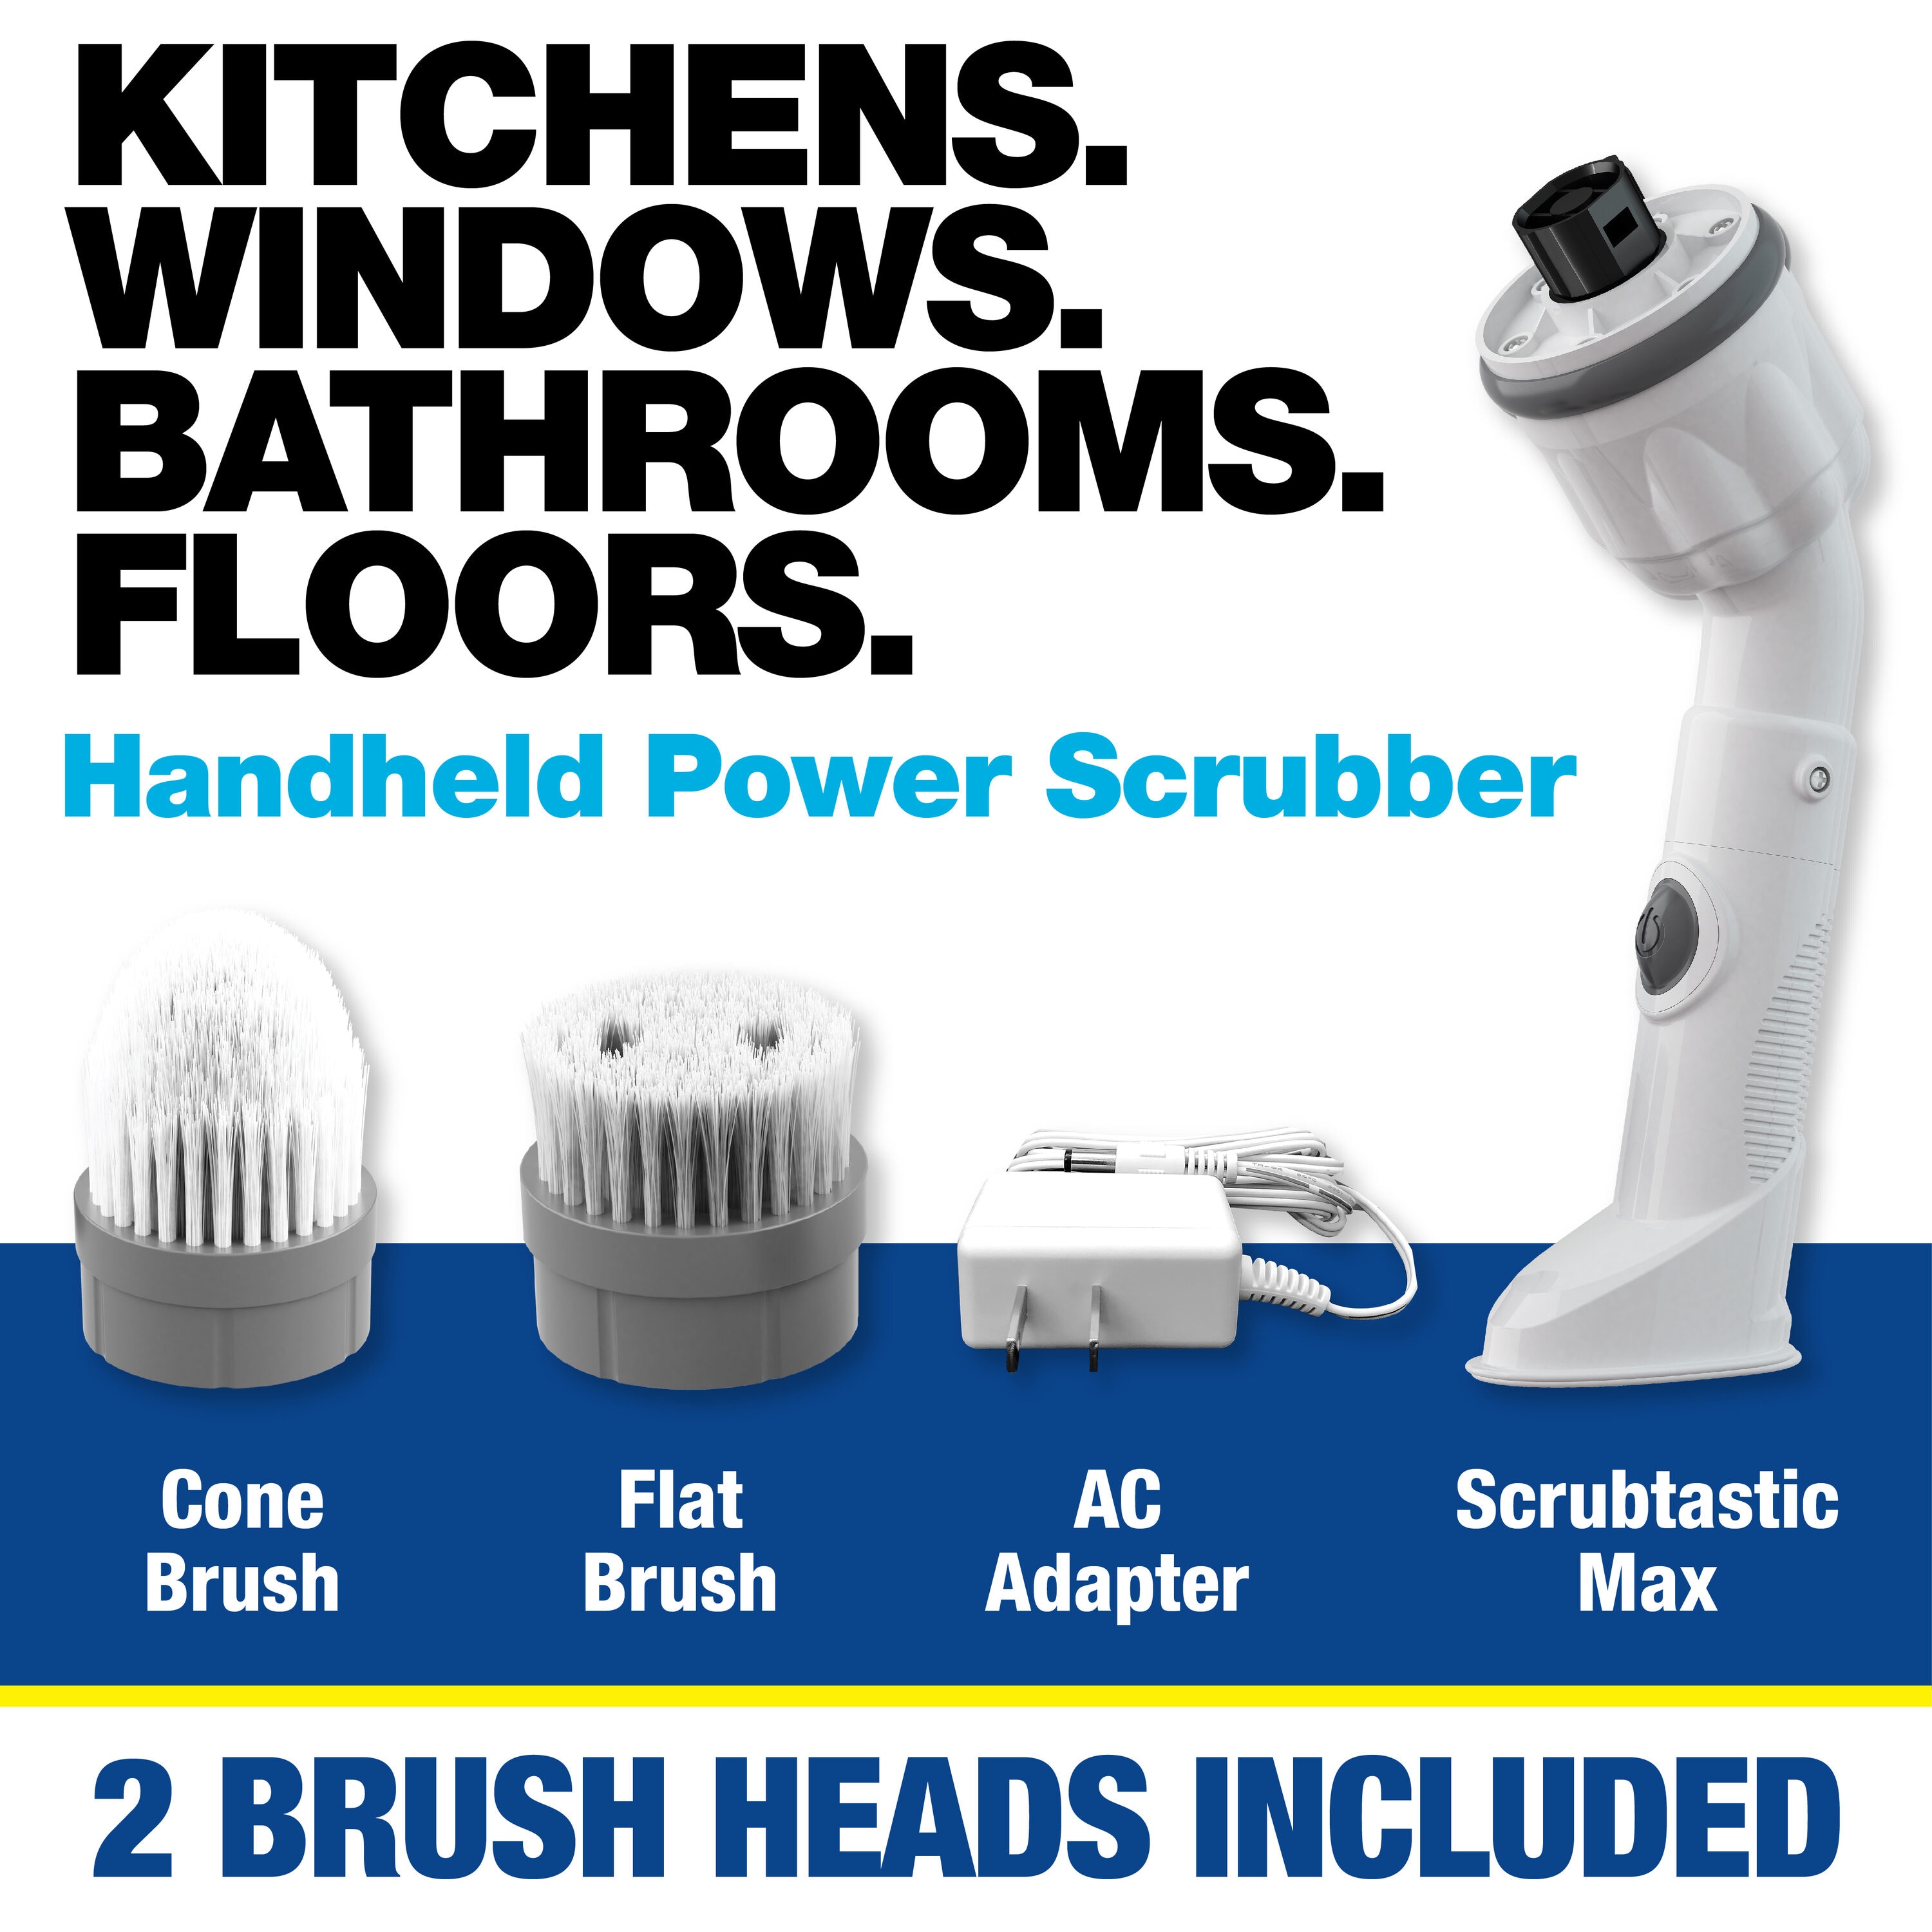 Bell + Howell Scrubtastic Rechargeable Multi Purpose Extendable Power  Scrubber 8048, Color: White - JCPenney